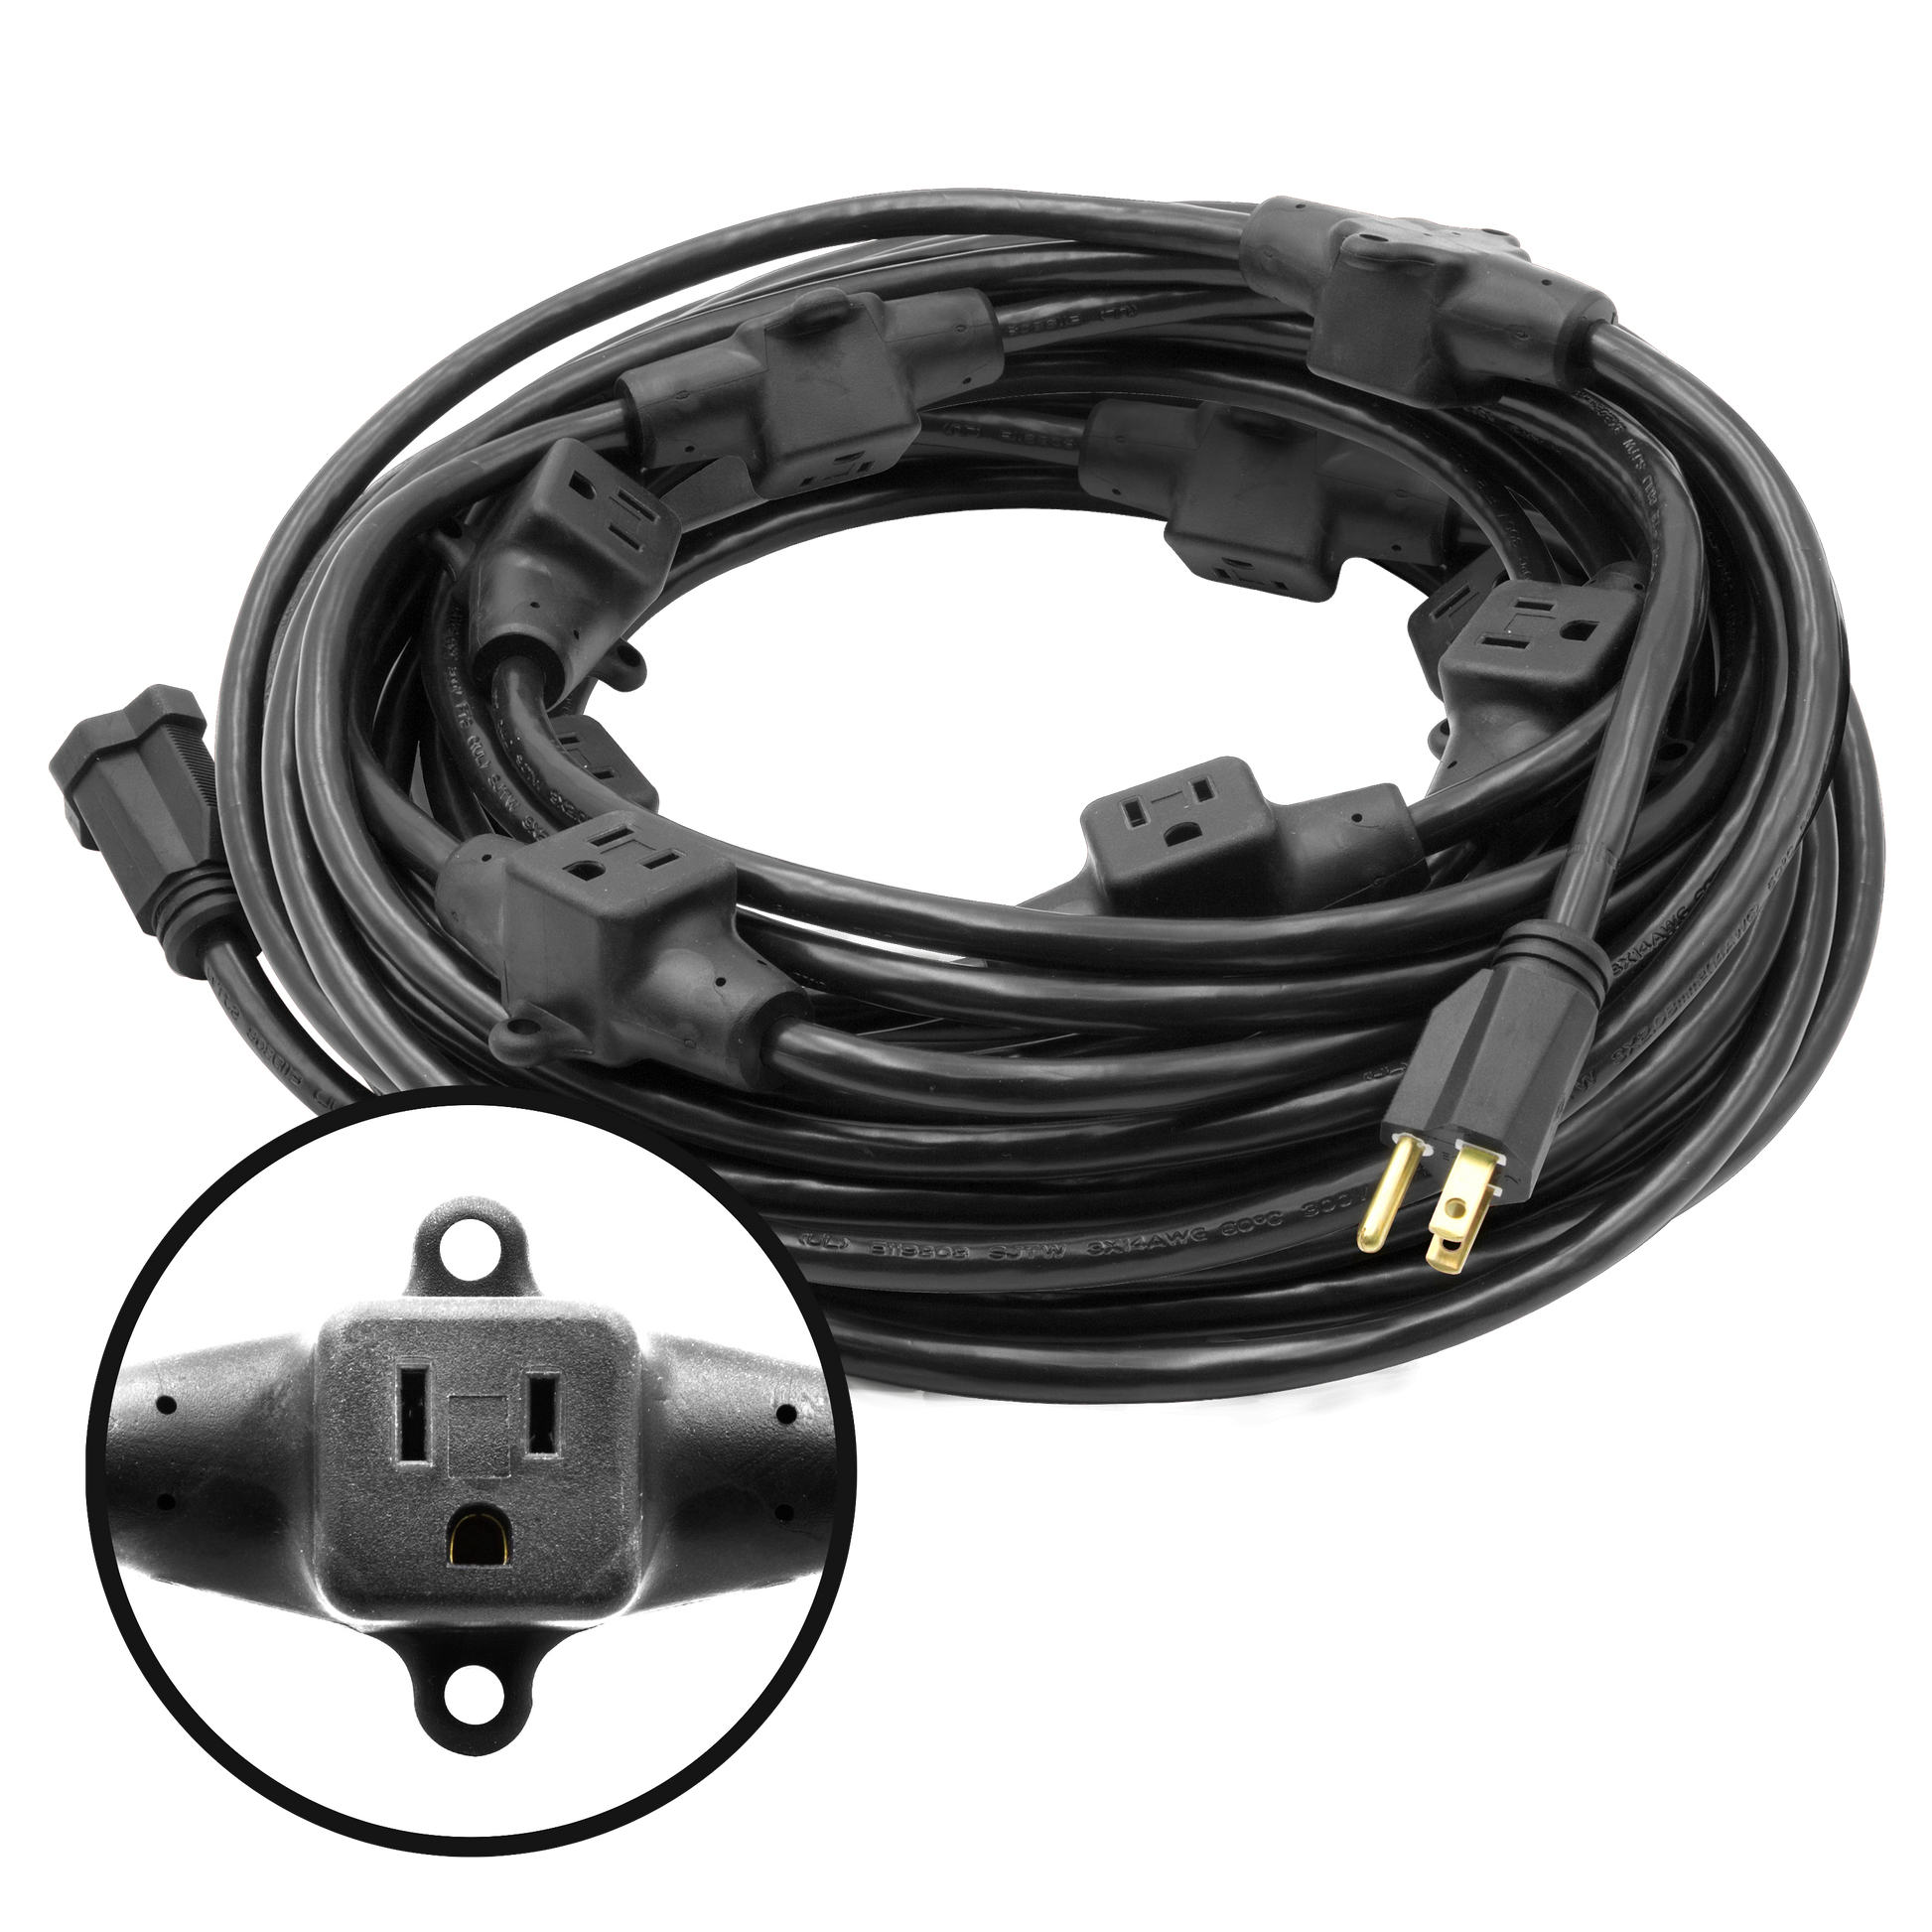 11 Multi-Outlet Extension Cord